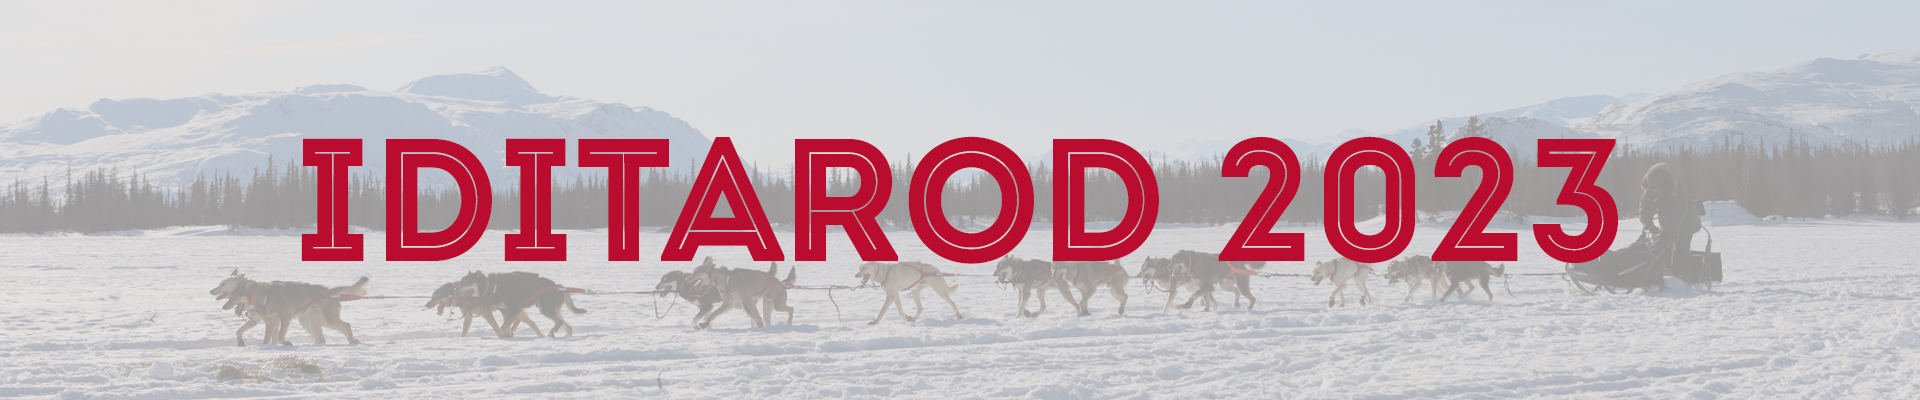 Iditarod 2023 (red text over photo of mushing team)